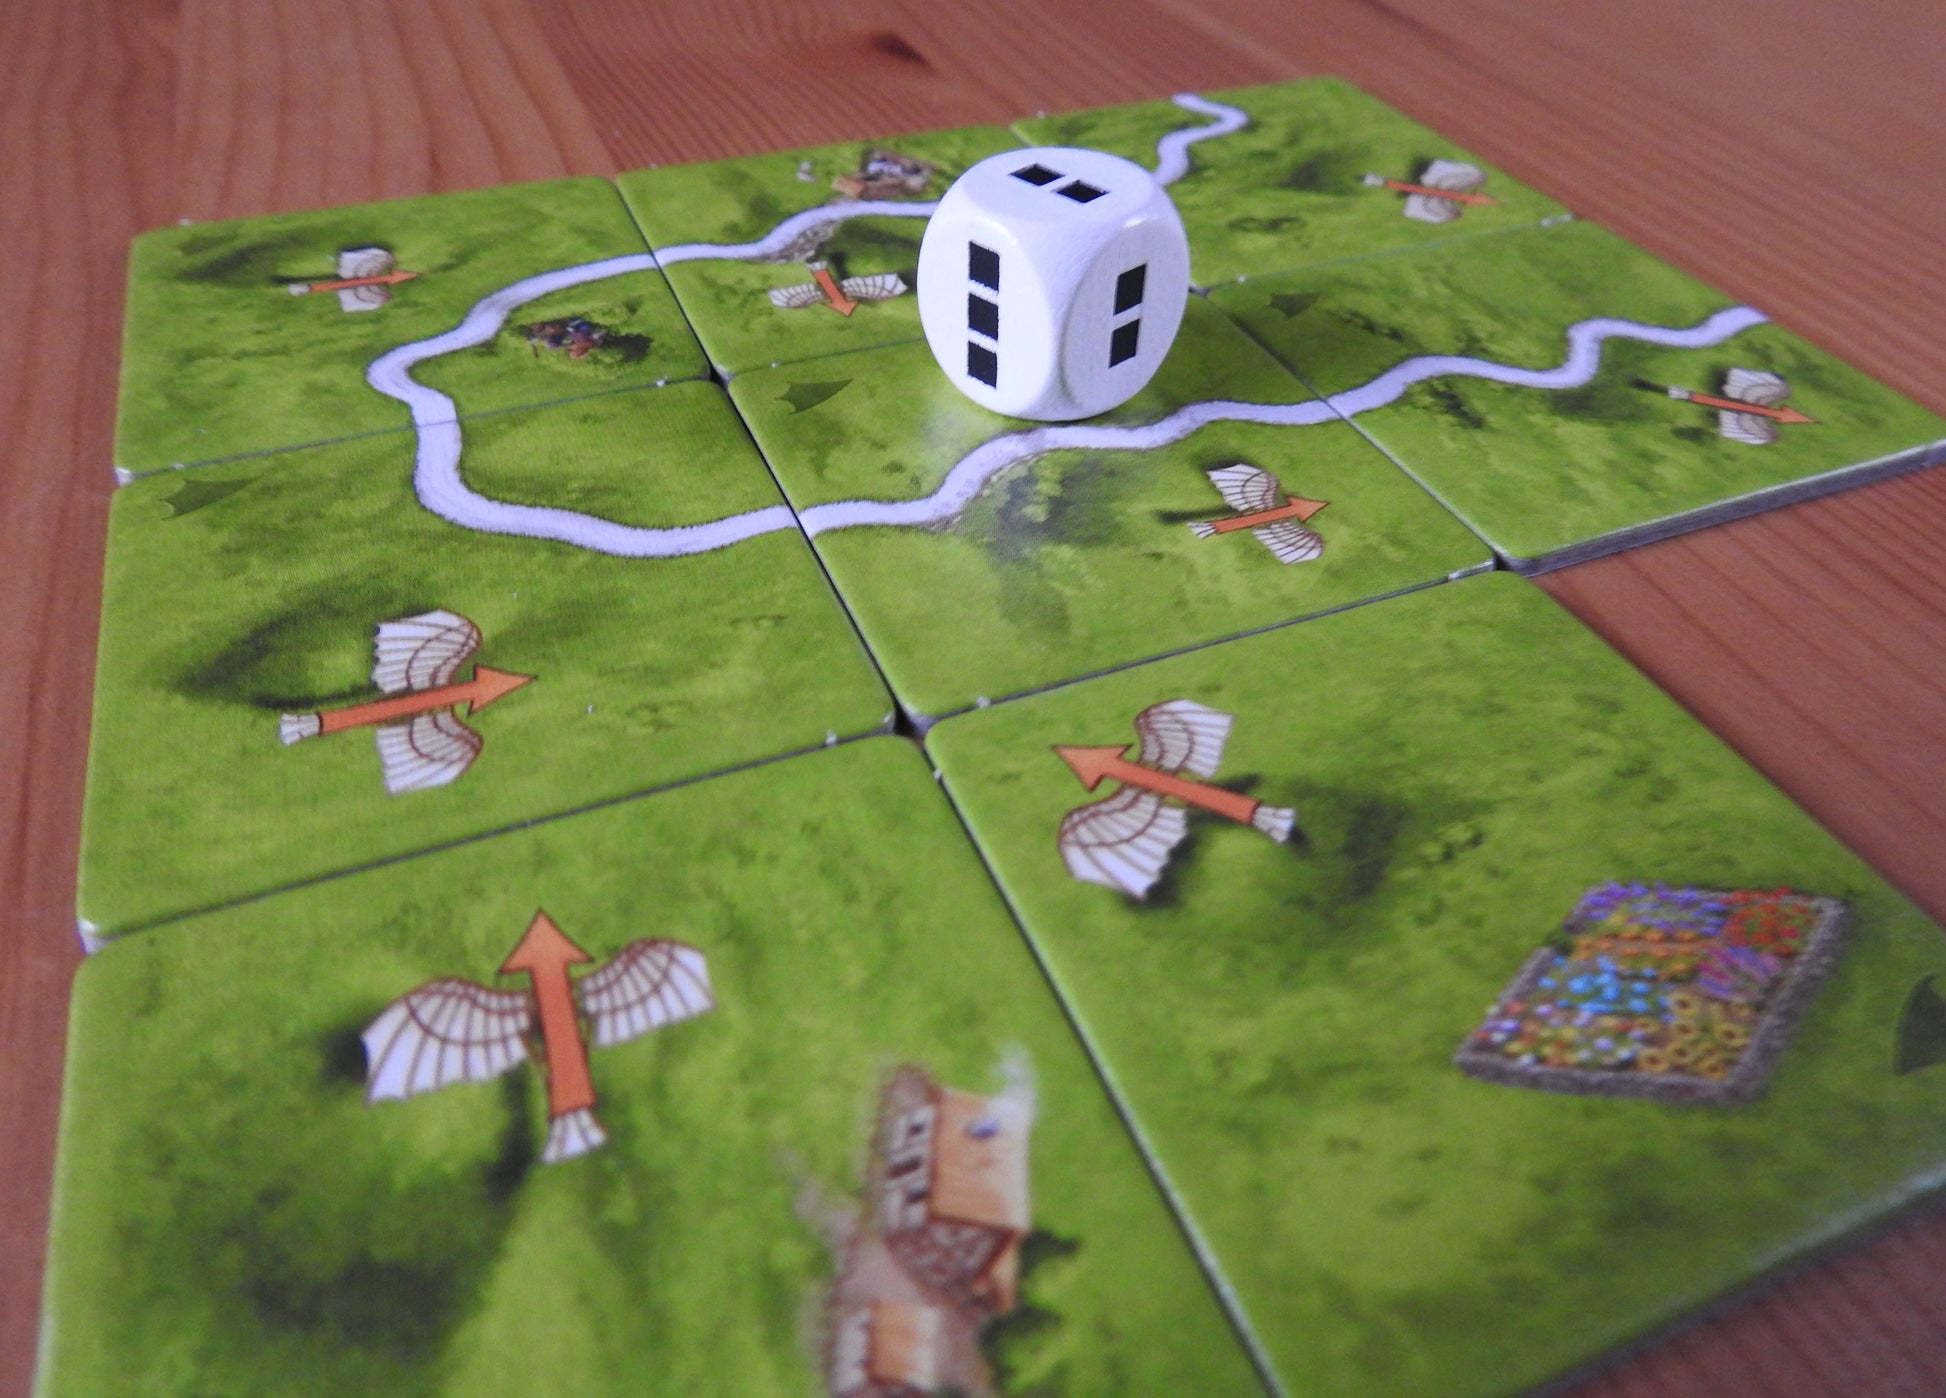 A view from a lower angle of all the pieces from this Carcassonne Flying Machines expansion.